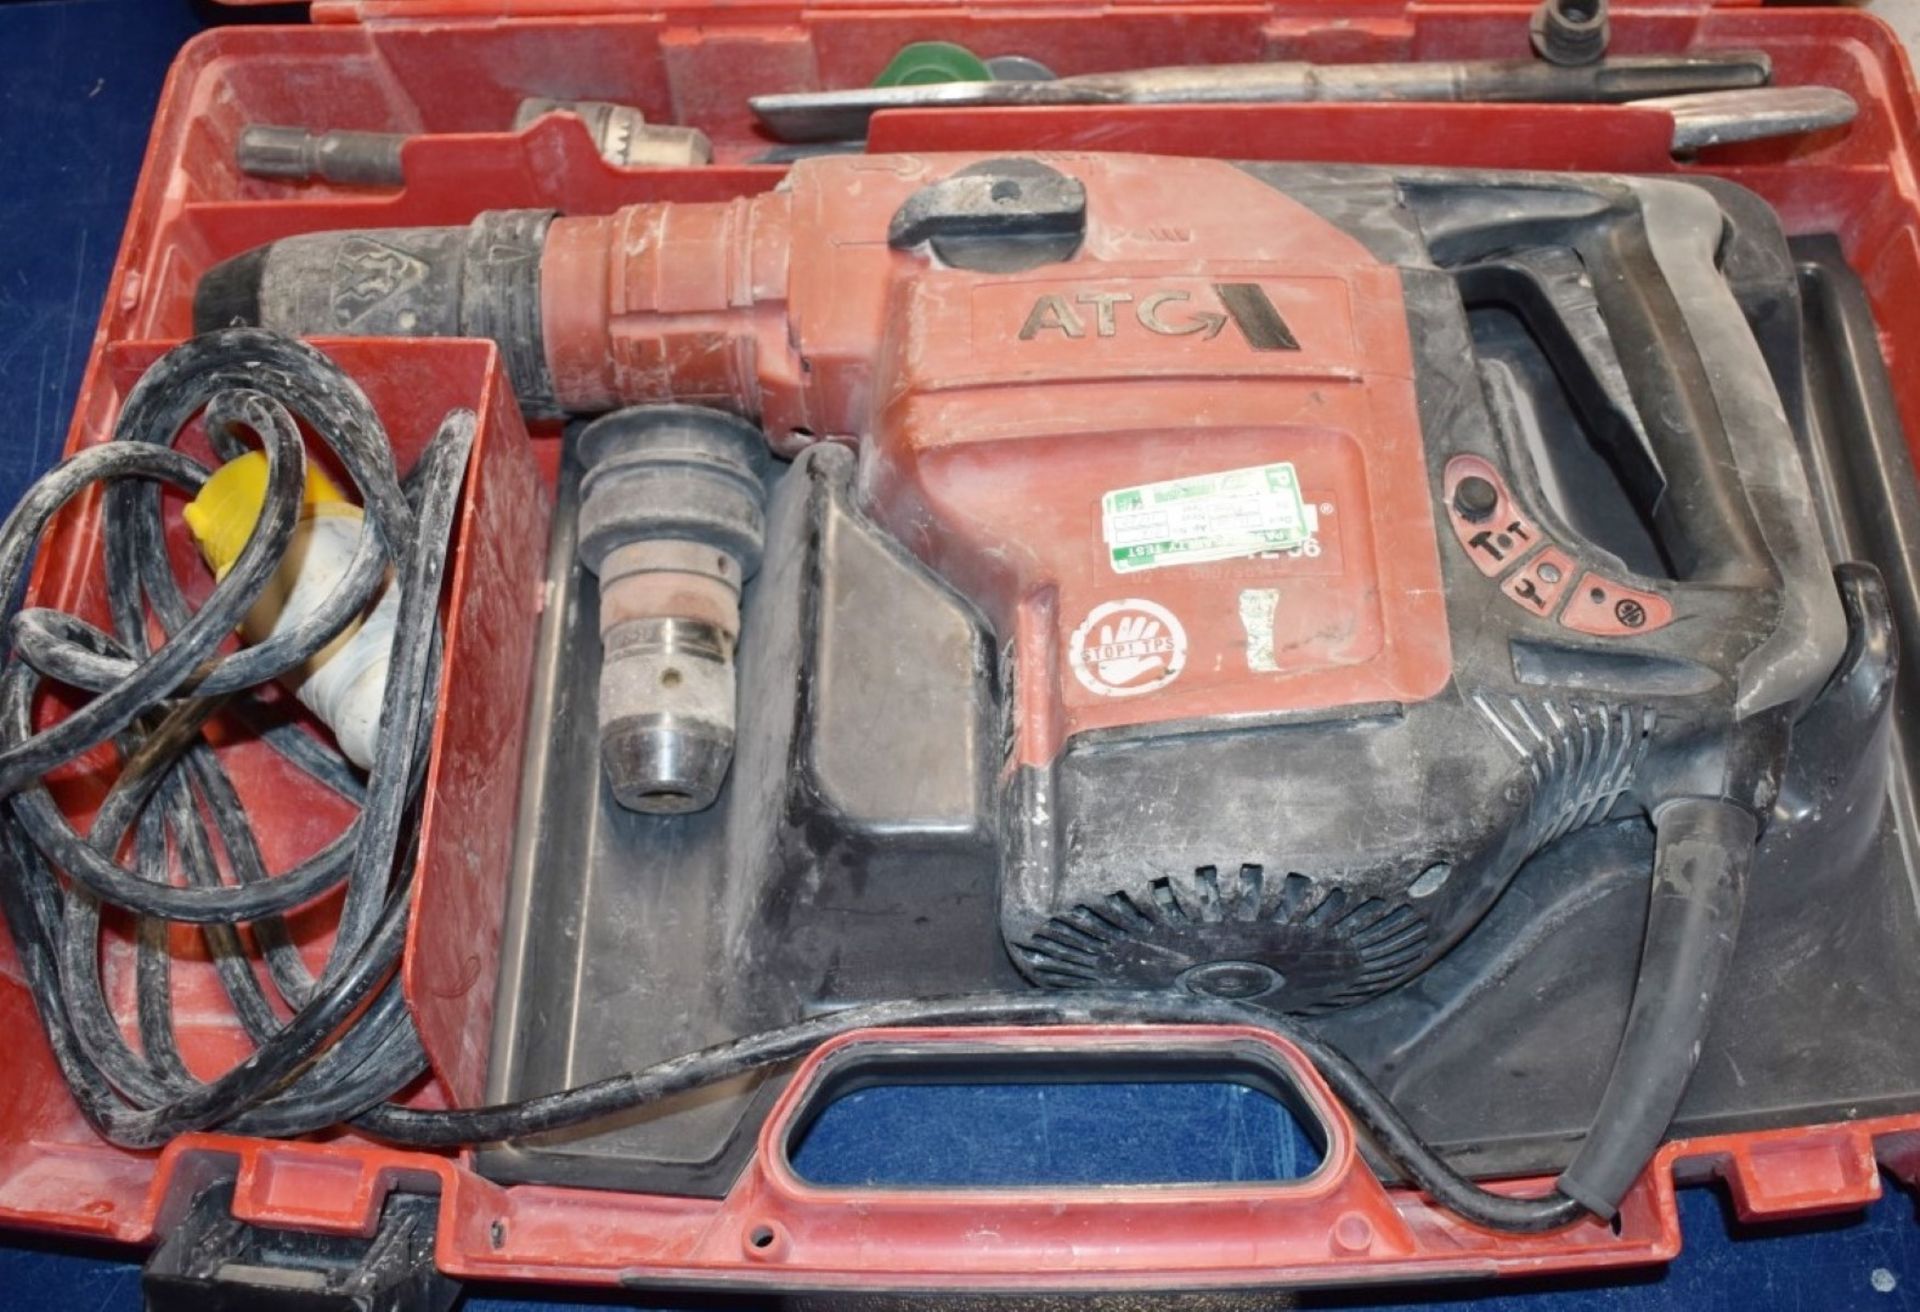 1 x Hilti TE56 110v Rotary Hammer Drill With Various Drill Bits and Carry Case PME142